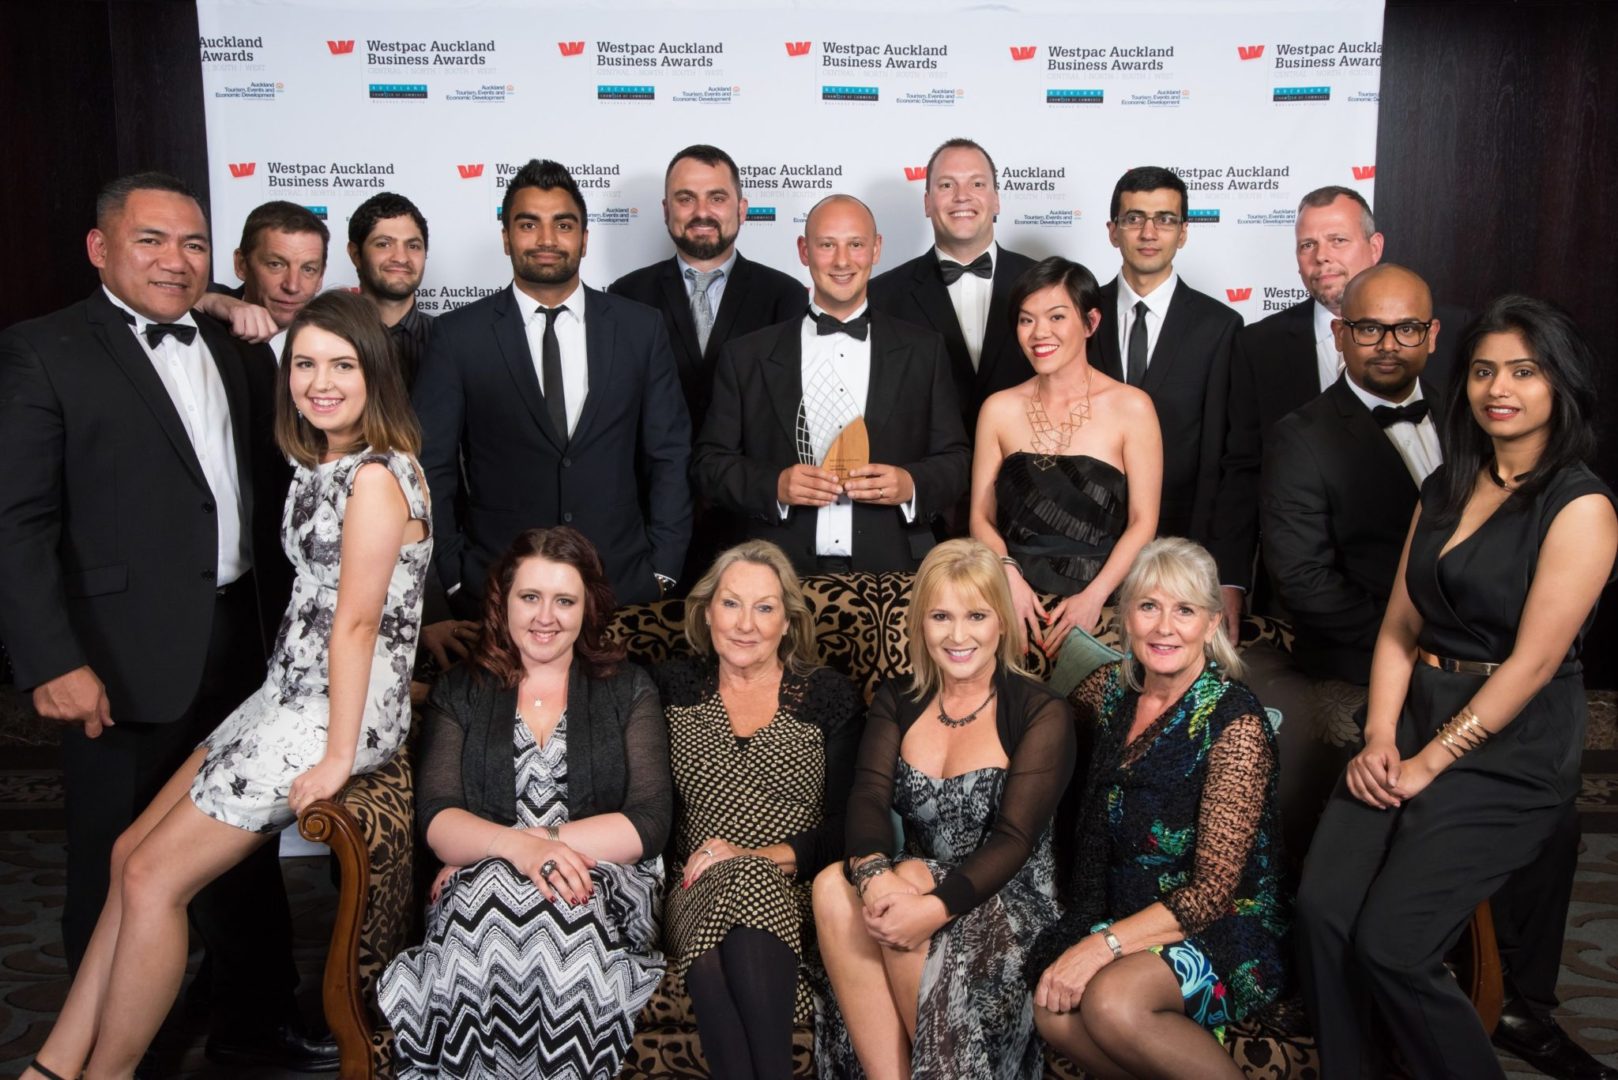 Westpac Auckland Business Awards 2014 Central